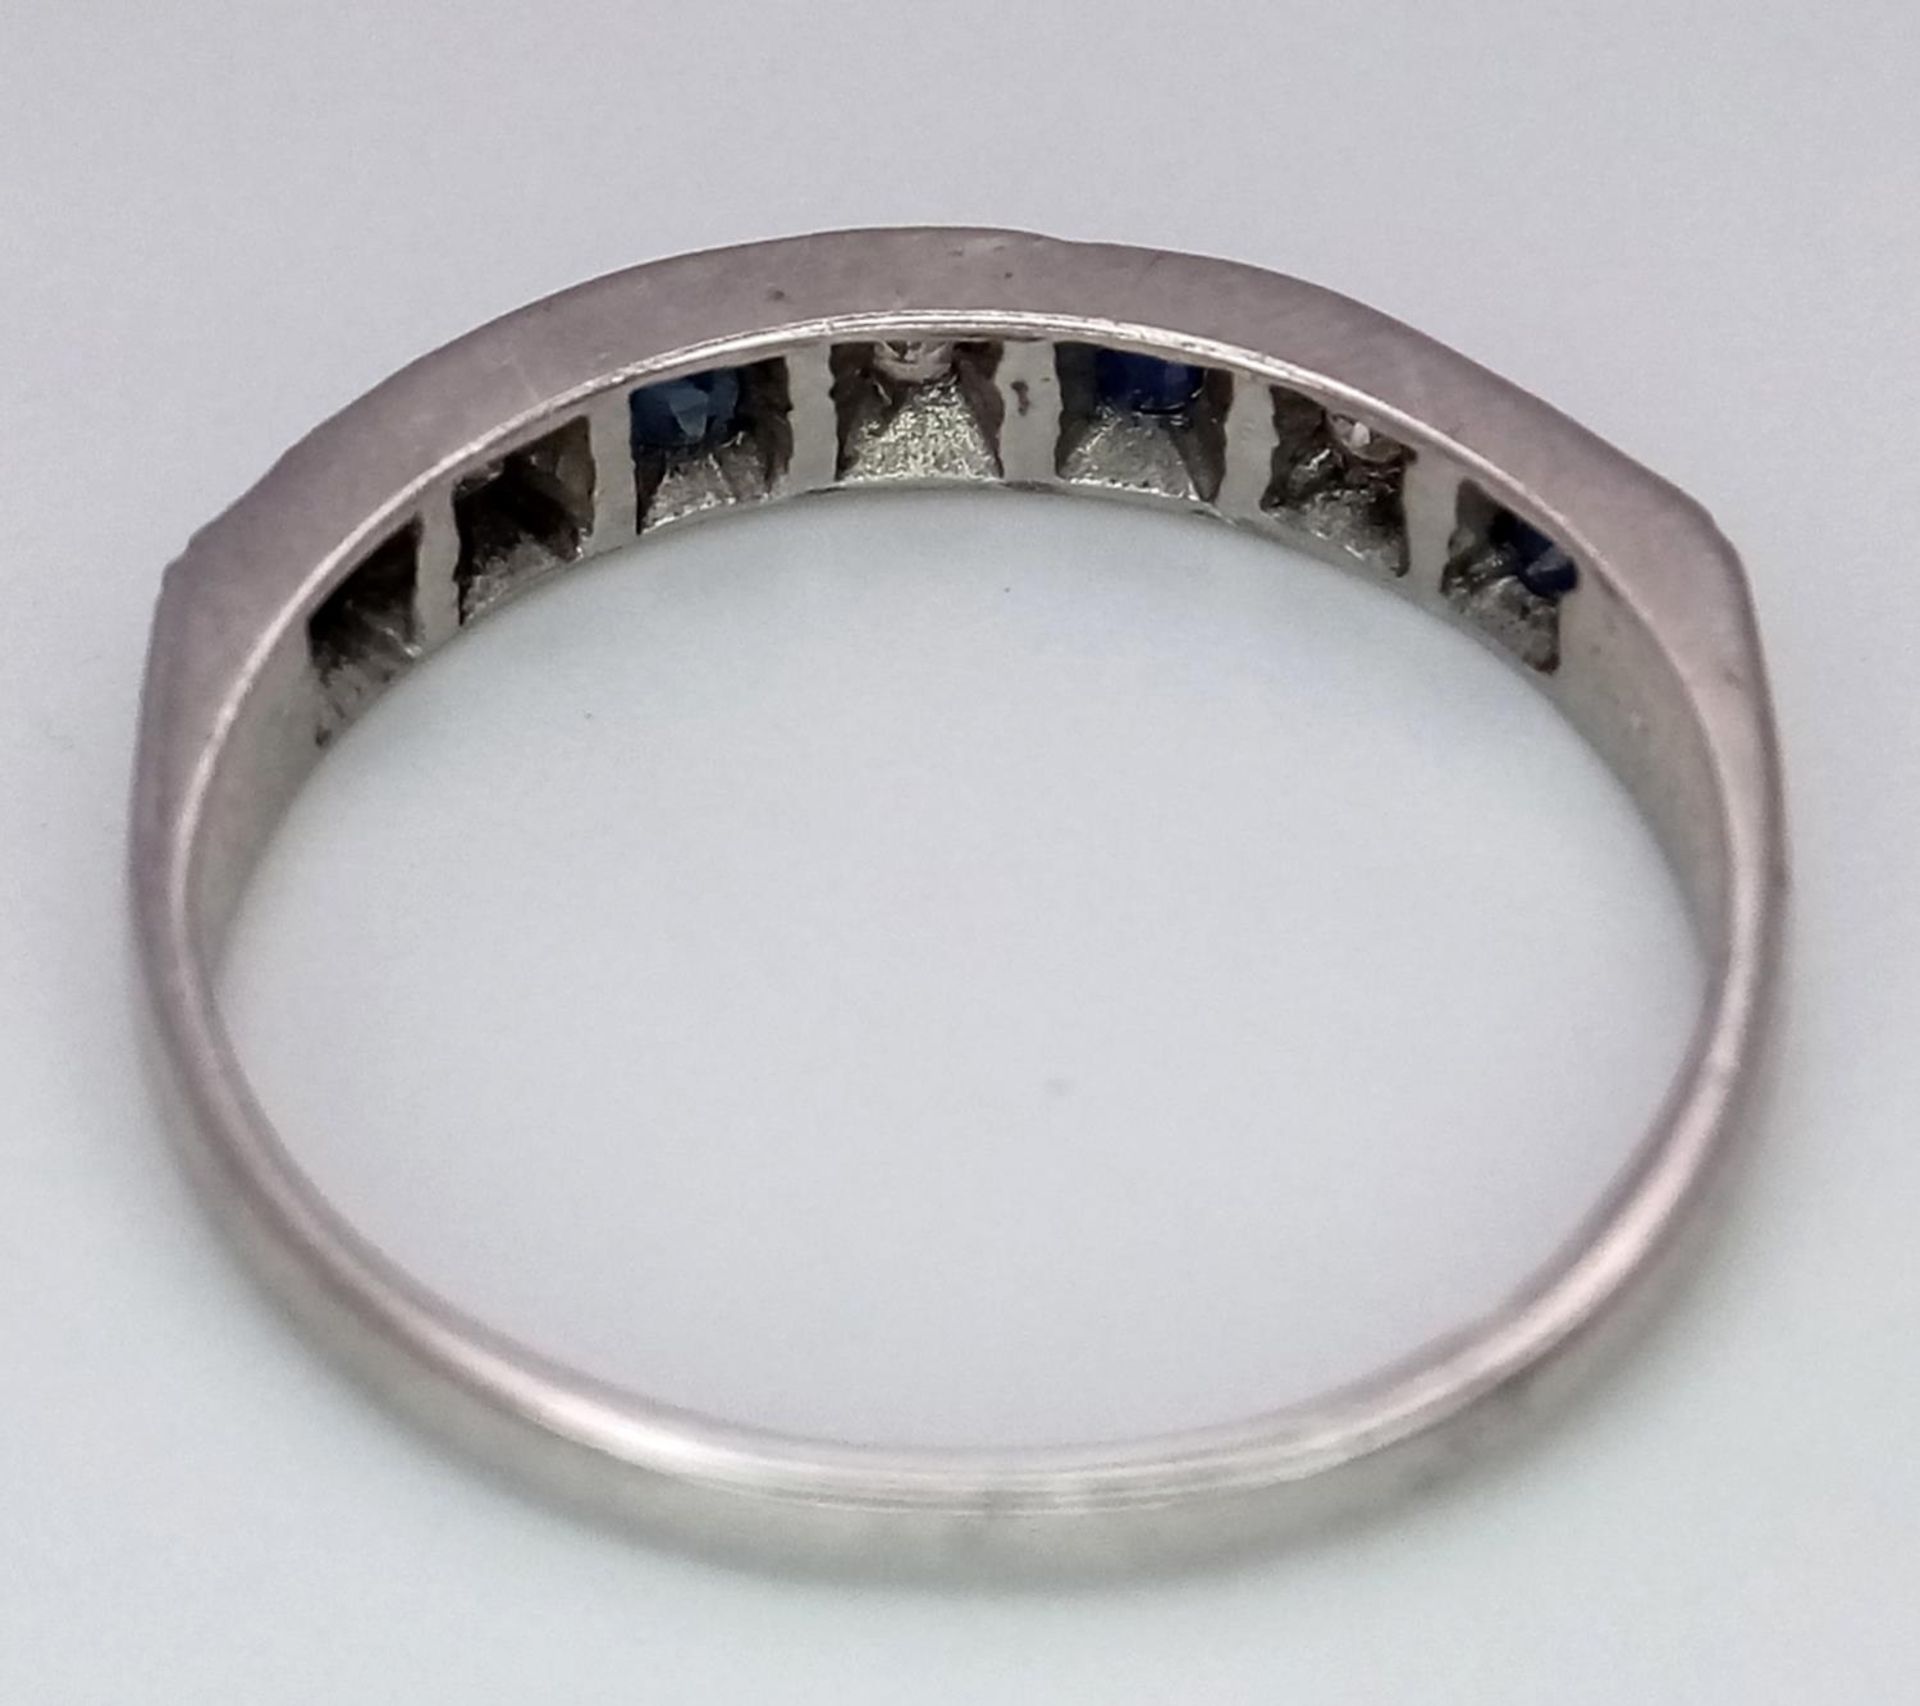 A 9K WHITE GOLD DIAMOND & SAPPHIRE BAND RING 2G SIZE N SPAS 9004 - Image 4 of 5